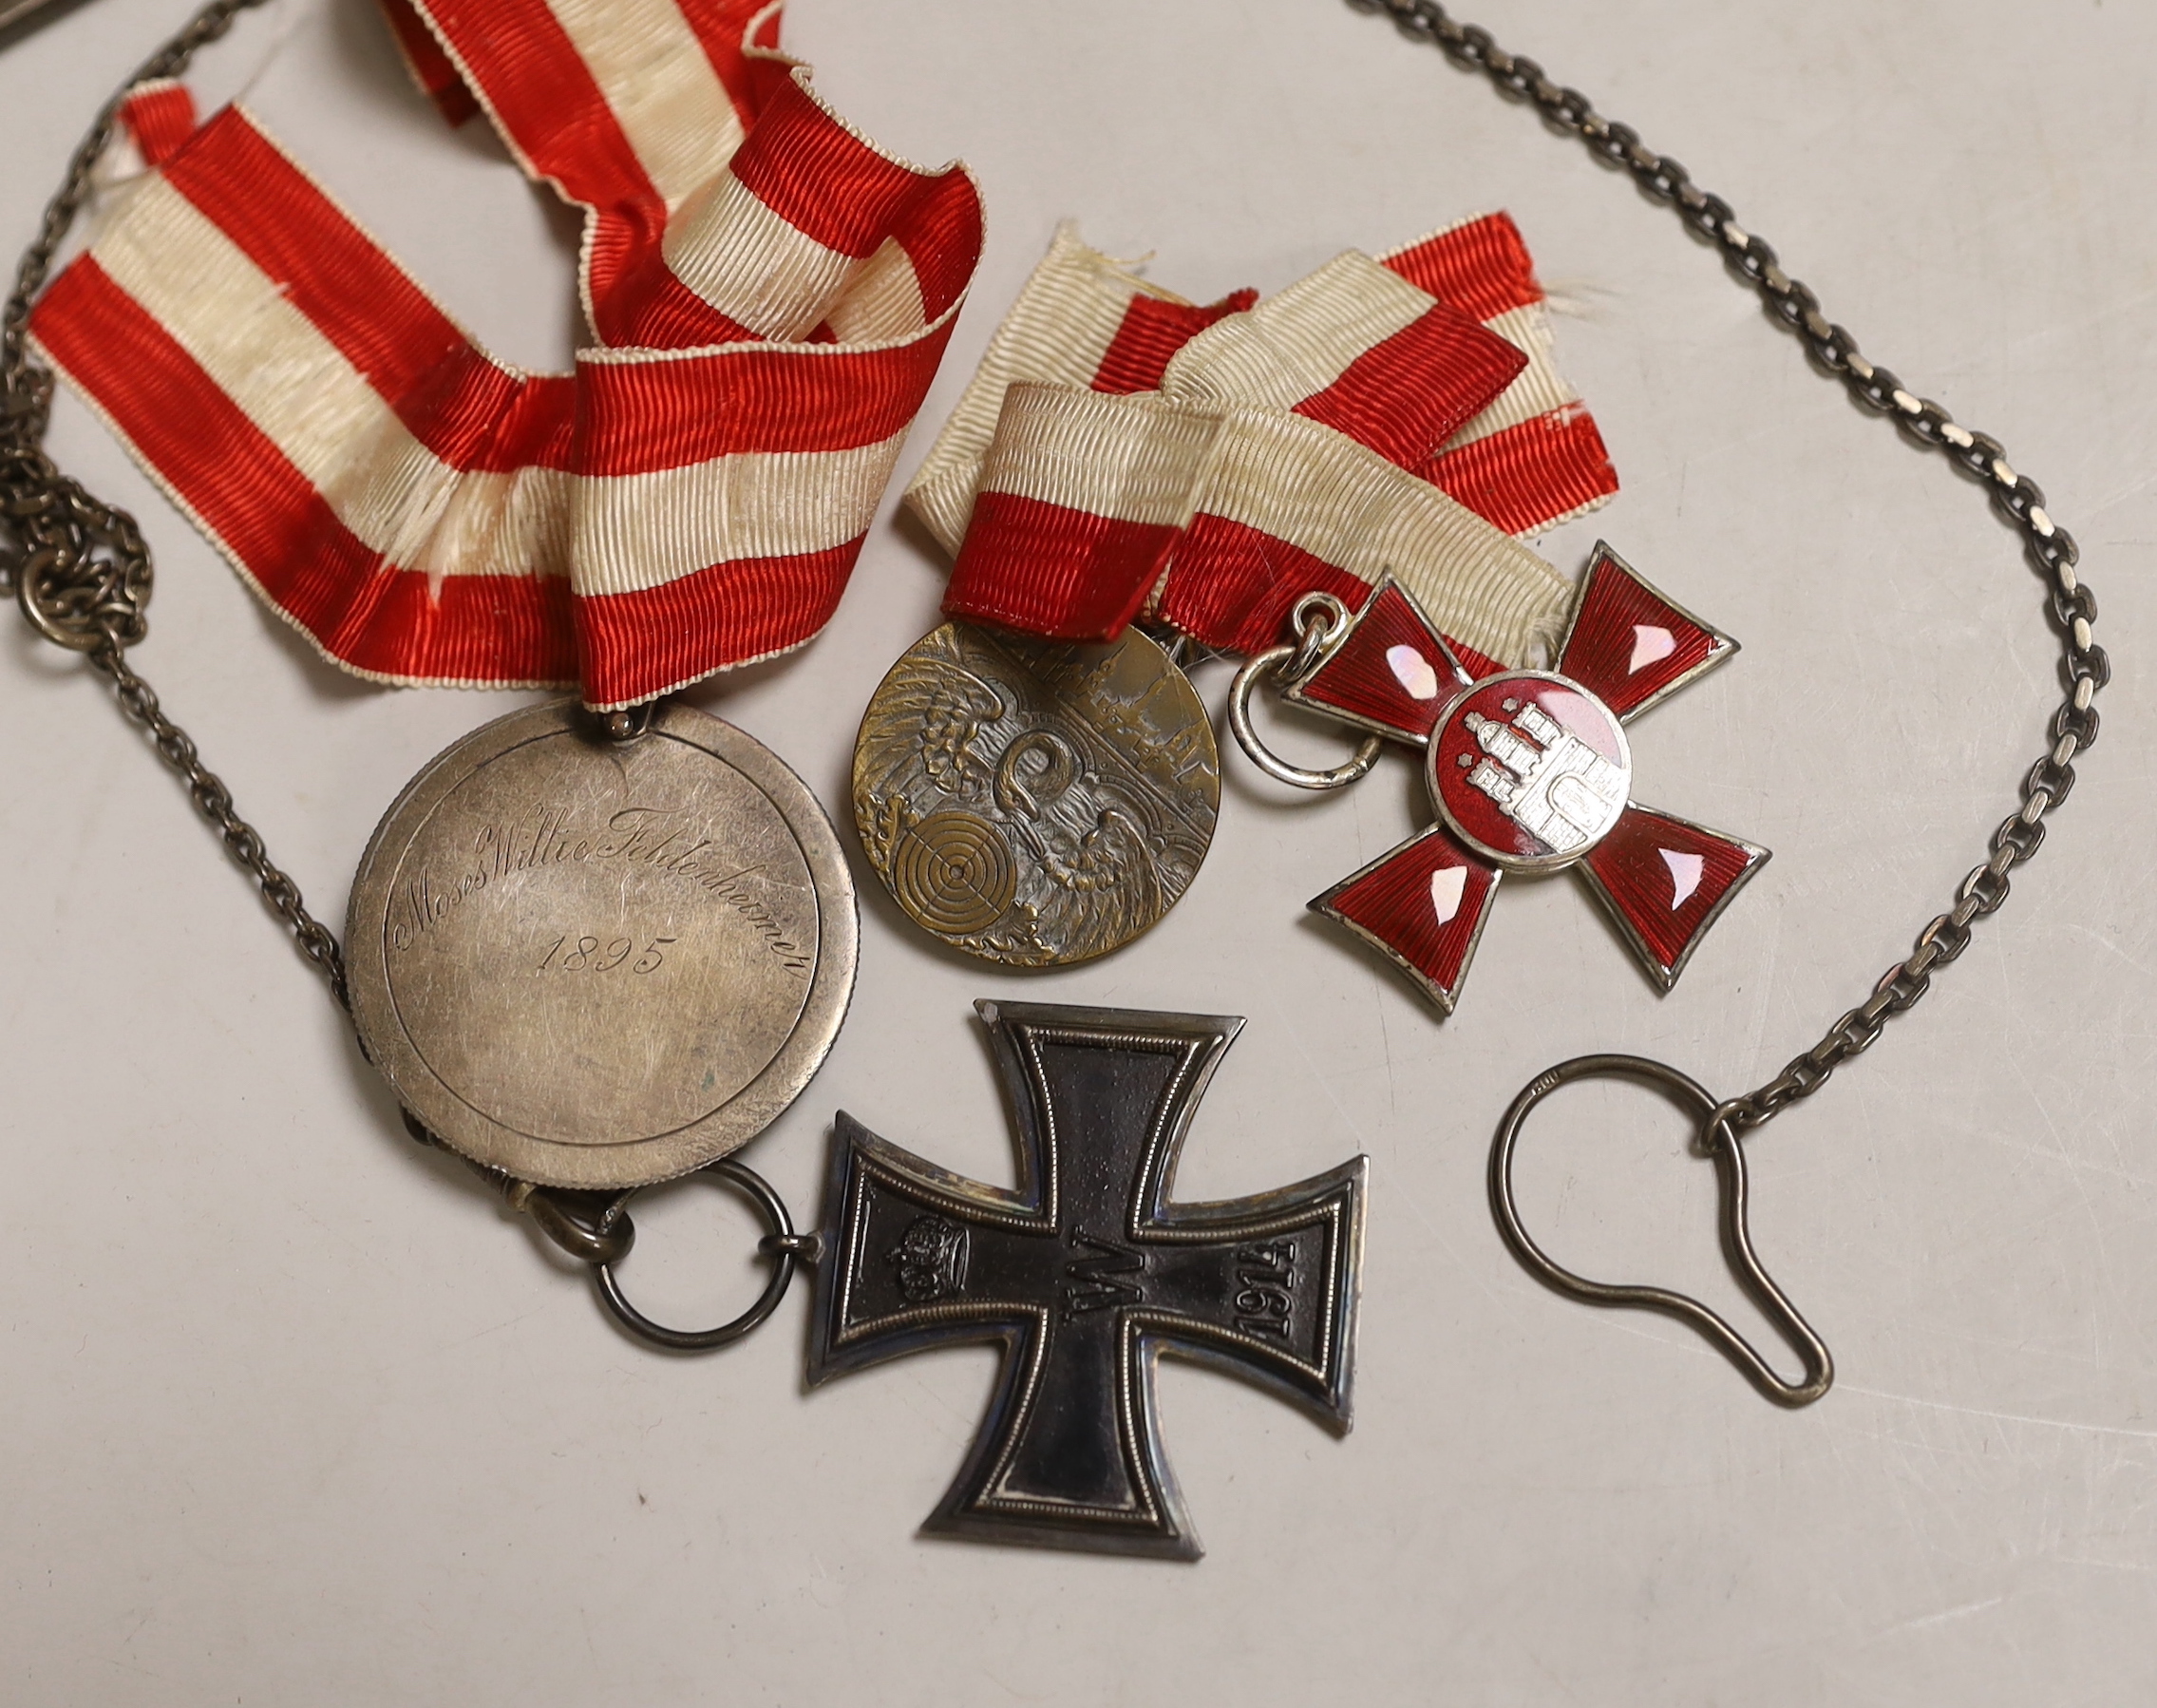 Four German medals including an iron cross